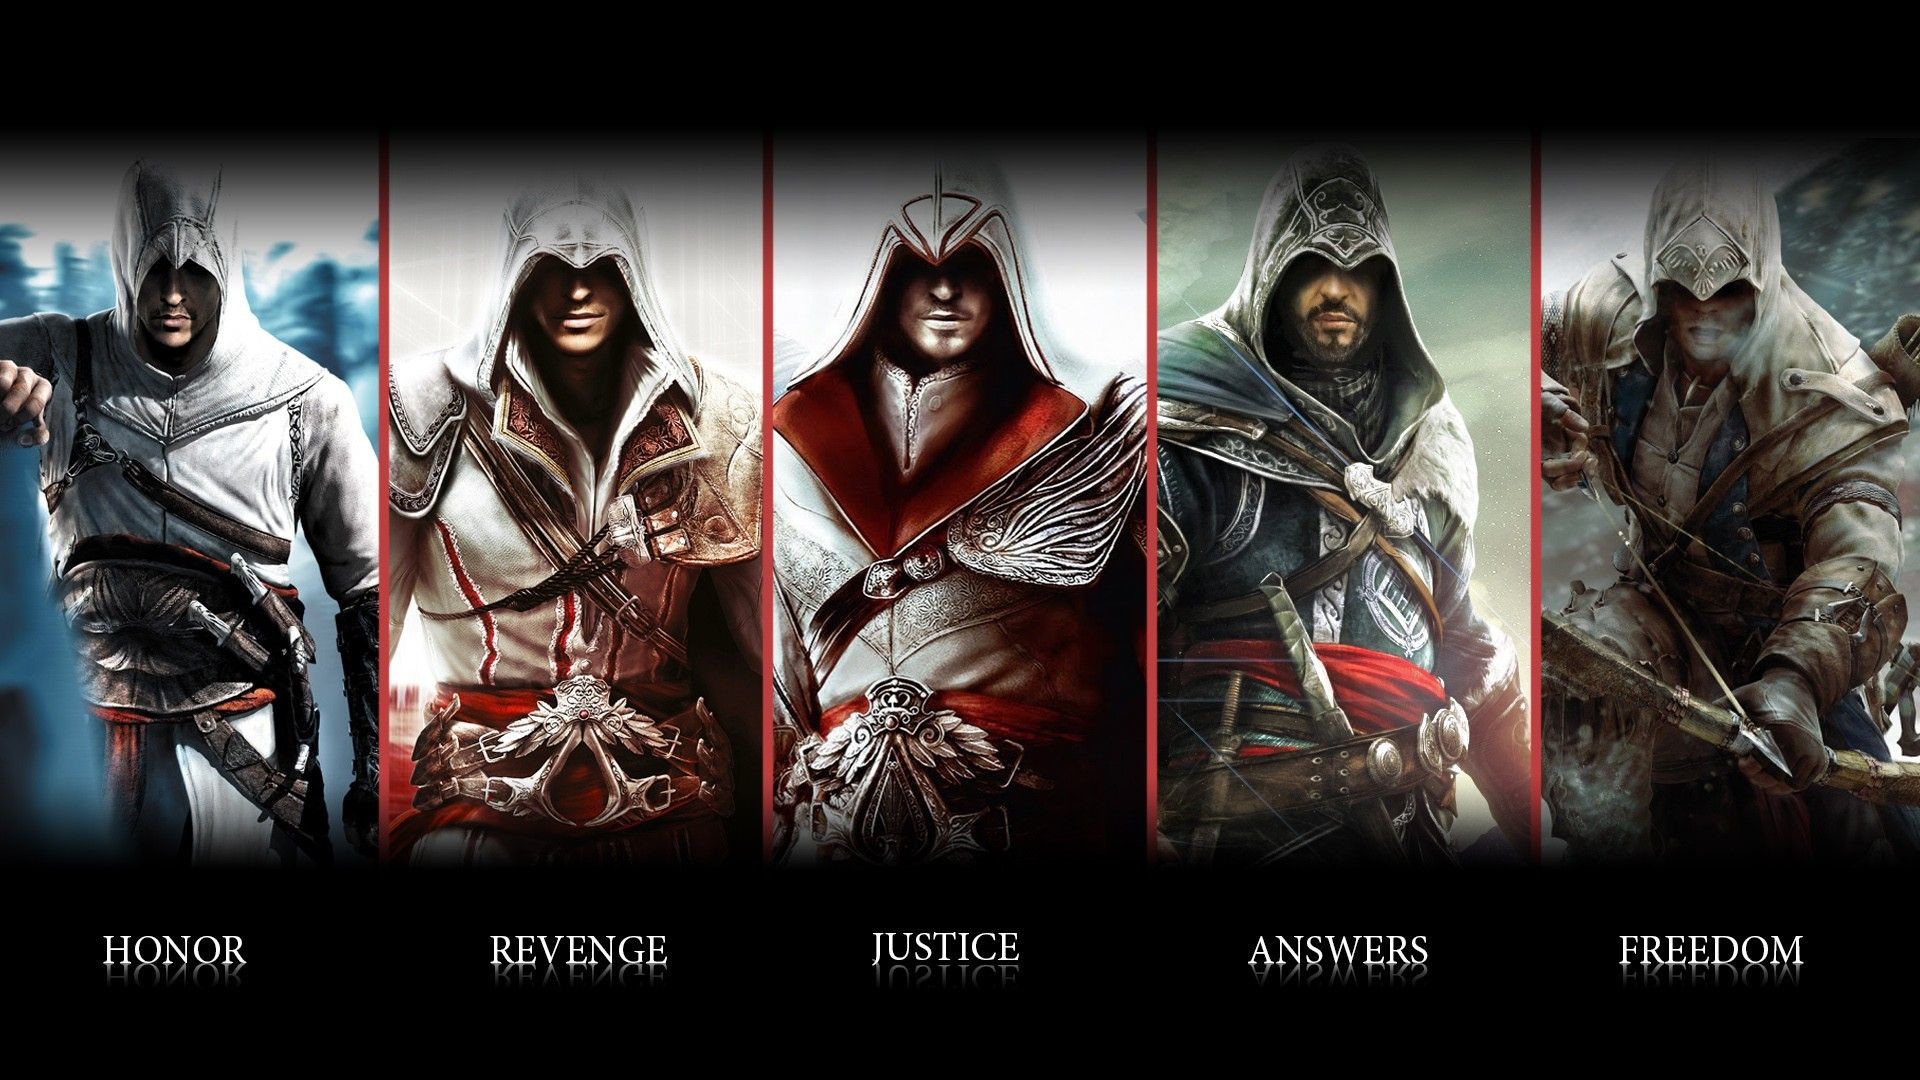 1920x1080 Assassins Creed Video Game Assassins Creed Video Game HD Wallpaper